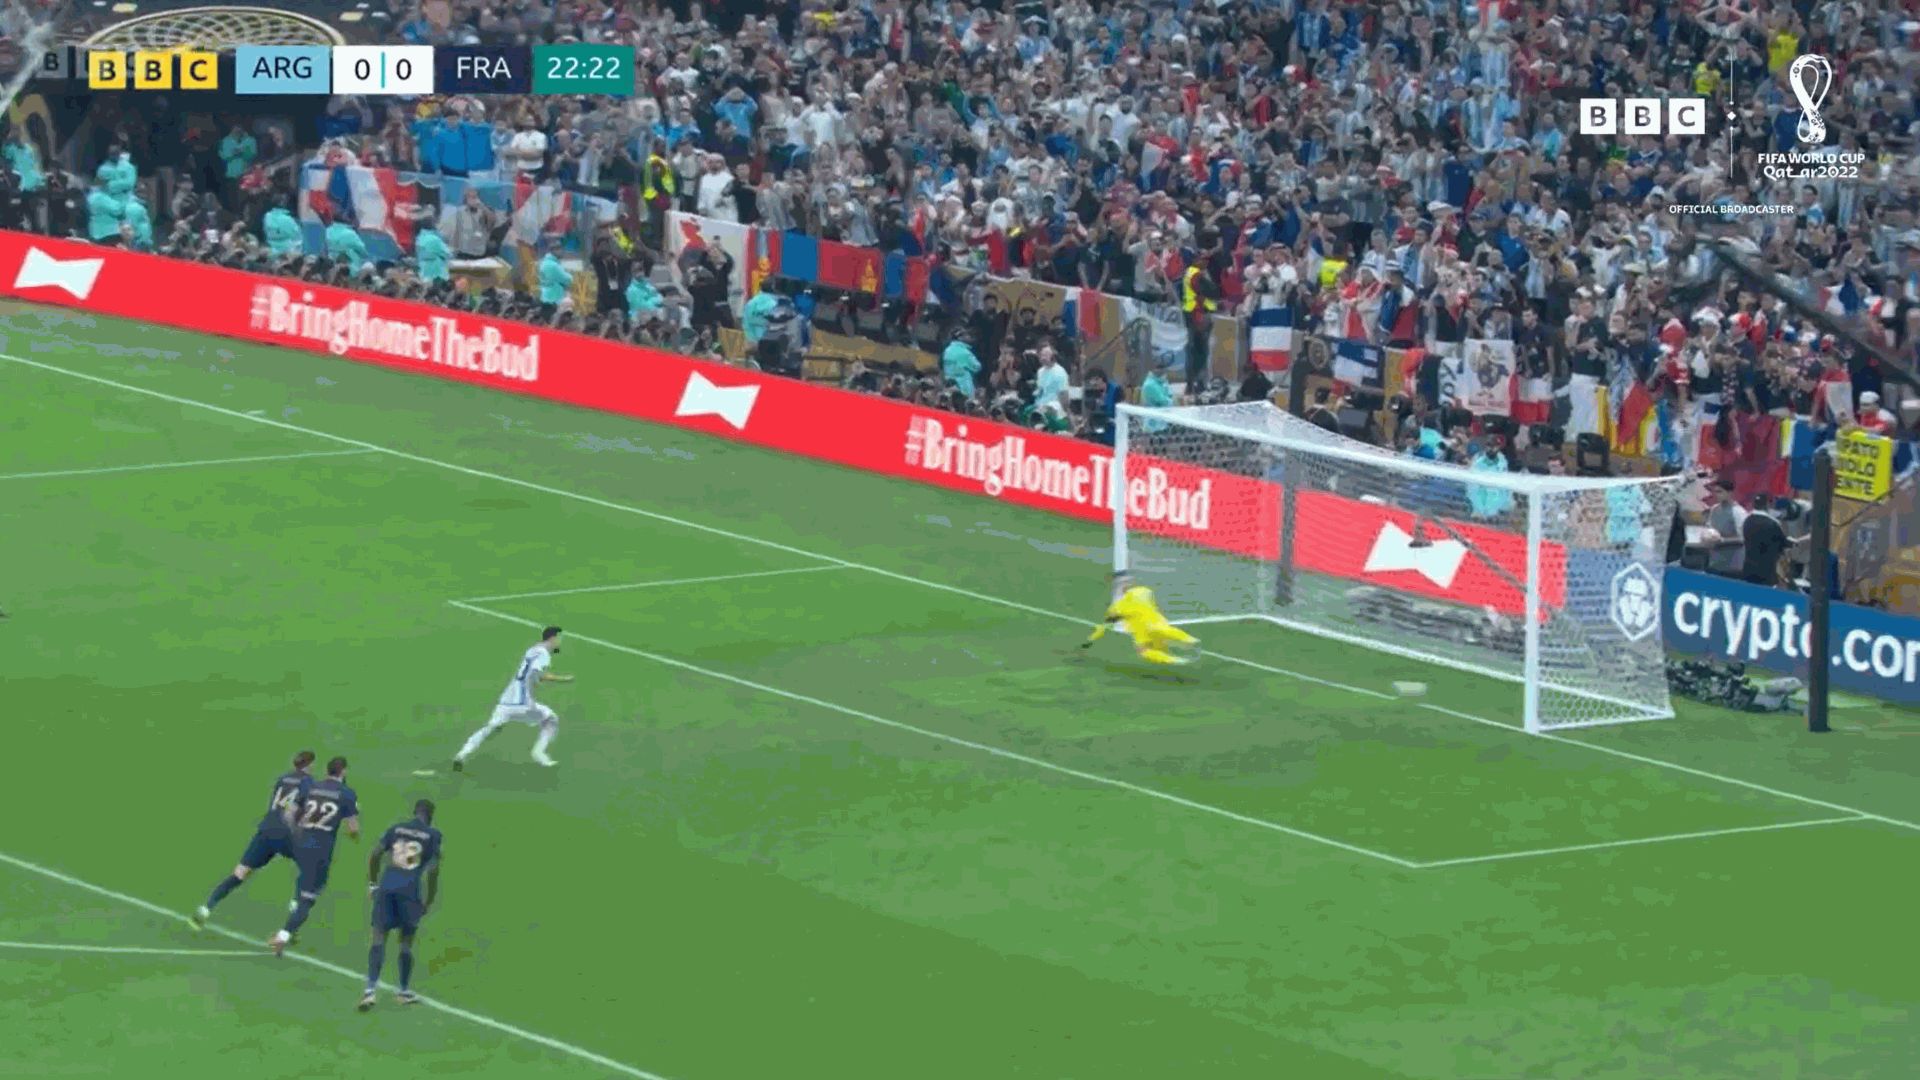 WATCH: Lionel Messi gives Argentina the lead from the spot